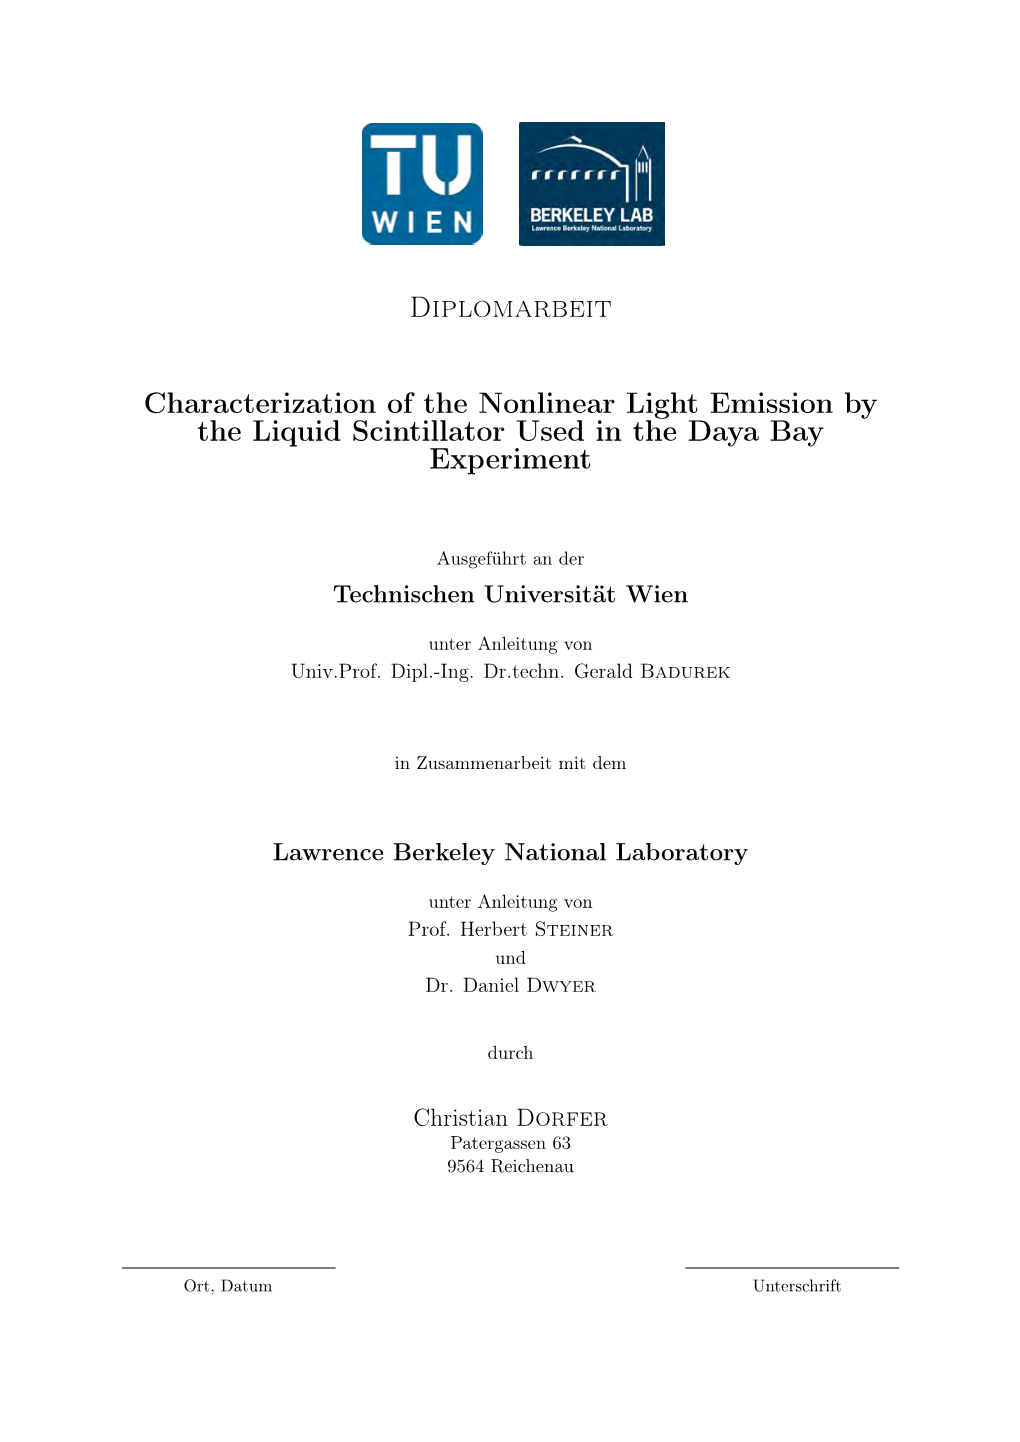 Characterization of the Nonlinear Light Emission by the Liquid Scintillator Used in the Daya Bay Experiment